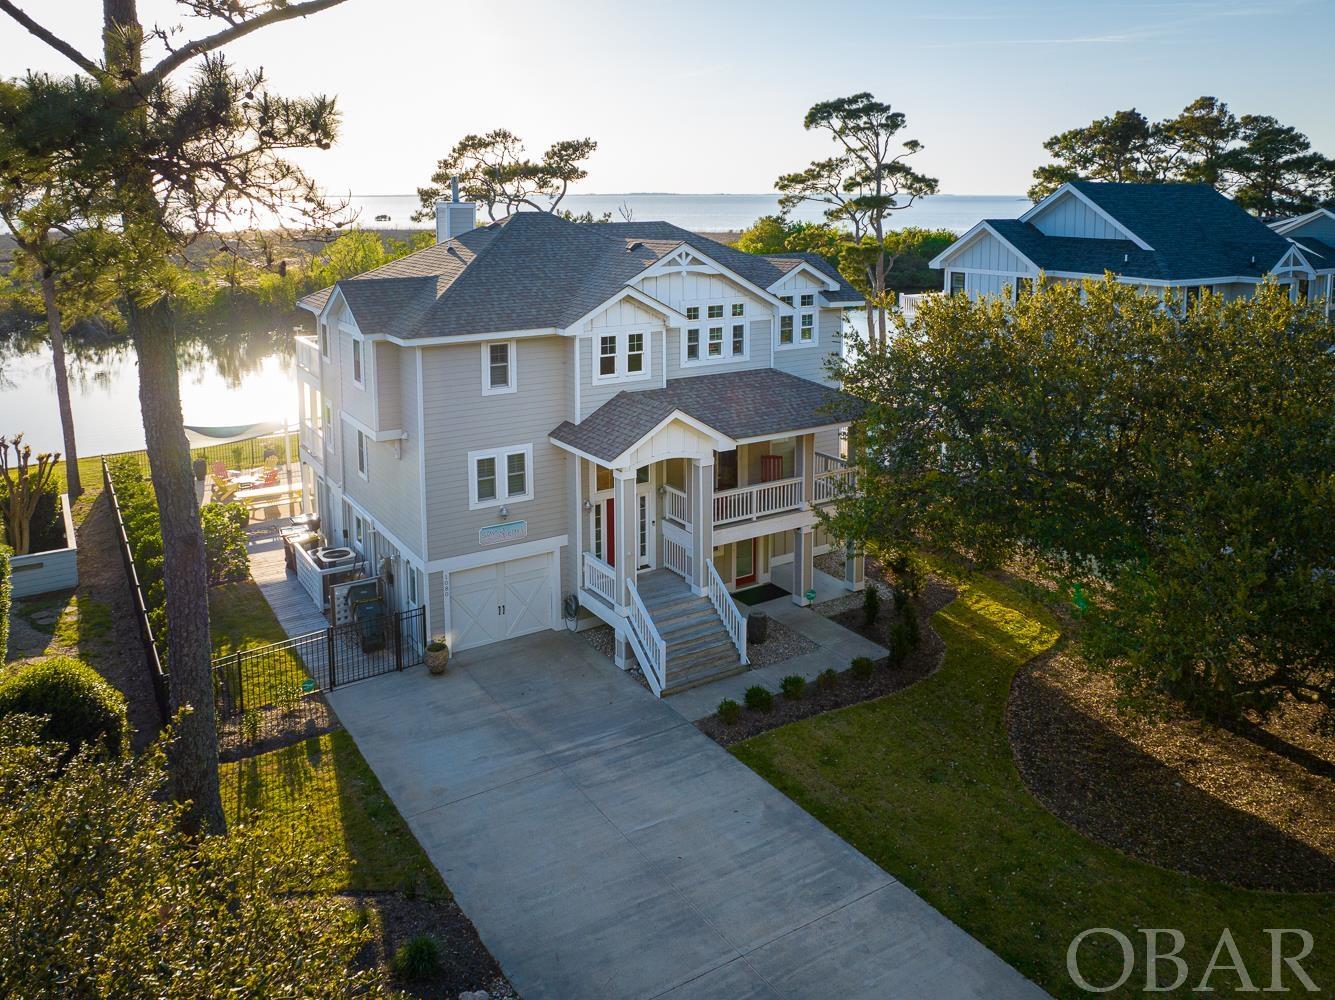 Welcome to Sand & Pearl. Built in 2016 by renowned OBX custom builder Dave Stormont, this beautiful 5-bedroom retreat is located in the heart of Corolla Light, a wonderful ocean to sound community in nestled in the live oaks surrounding Corolla Village. This home boasts breathtaking panoramic views of the sunset over The Currituck Sound, offering a serene and picturesque backdrop to your everyday life.  On the top level of this reverse floor plan home, you'll be greeted by a spacious and bright living area, perfect for relaxing, entertaining or just taking in the picturesque scenery overlooking the Currituck Sound. The open floor plan seamlessly connects the living room, dining area, and kitchen, providing ample space for your family and guests to mingle and enjoy each other's company. The kitchen is a chef's dream, complete with high-end appliances, custom cabinetry, and a large island with seating.  The home features 5 bedrooms each equipped with their own private bathroom, totaling 6 full bathrooms and 1 half bathroom, ensuring that everyone has plenty of space and privacy. The bedrooms are spacious and comfortable, offering a peaceful retreat at the end of a long day. The newly remodeled living space on the ground level is decked out with a NEW custom bar, making it the perfect spot for entertaining or relaxing with friends and family. Step outside through the sliding glass door and you'll find a private pool and newly fenced-in backyard overlooking the Currituck Sound, providing the perfect spot for outdoor gatherings. This home is also equipped with an elevator with ground level entry (no stairs to climb), making it easily accessible for everyone.  In addition to the amenities of this beautiful home, the Corolla Light community offers an array of activities and conveniences. Just a few of the highlights of this community are an indoor pool and sports complex, outdoor pools on the oceanfront and soundfront, a trolley service, and an oceanfront grill. Whether you're looking for a day of adventure or a relaxing afternoon by the pool, there's something for everyone in this wonderful community. This home has been METICULOUSLY maintained and functionally designed. It is only missing you! Don't miss this rare opportunity to own a soundfront home of this caliber in one of the most sought-after communities on the Outer Banks! More exterior pictures coming soon after new landscaping is completed.